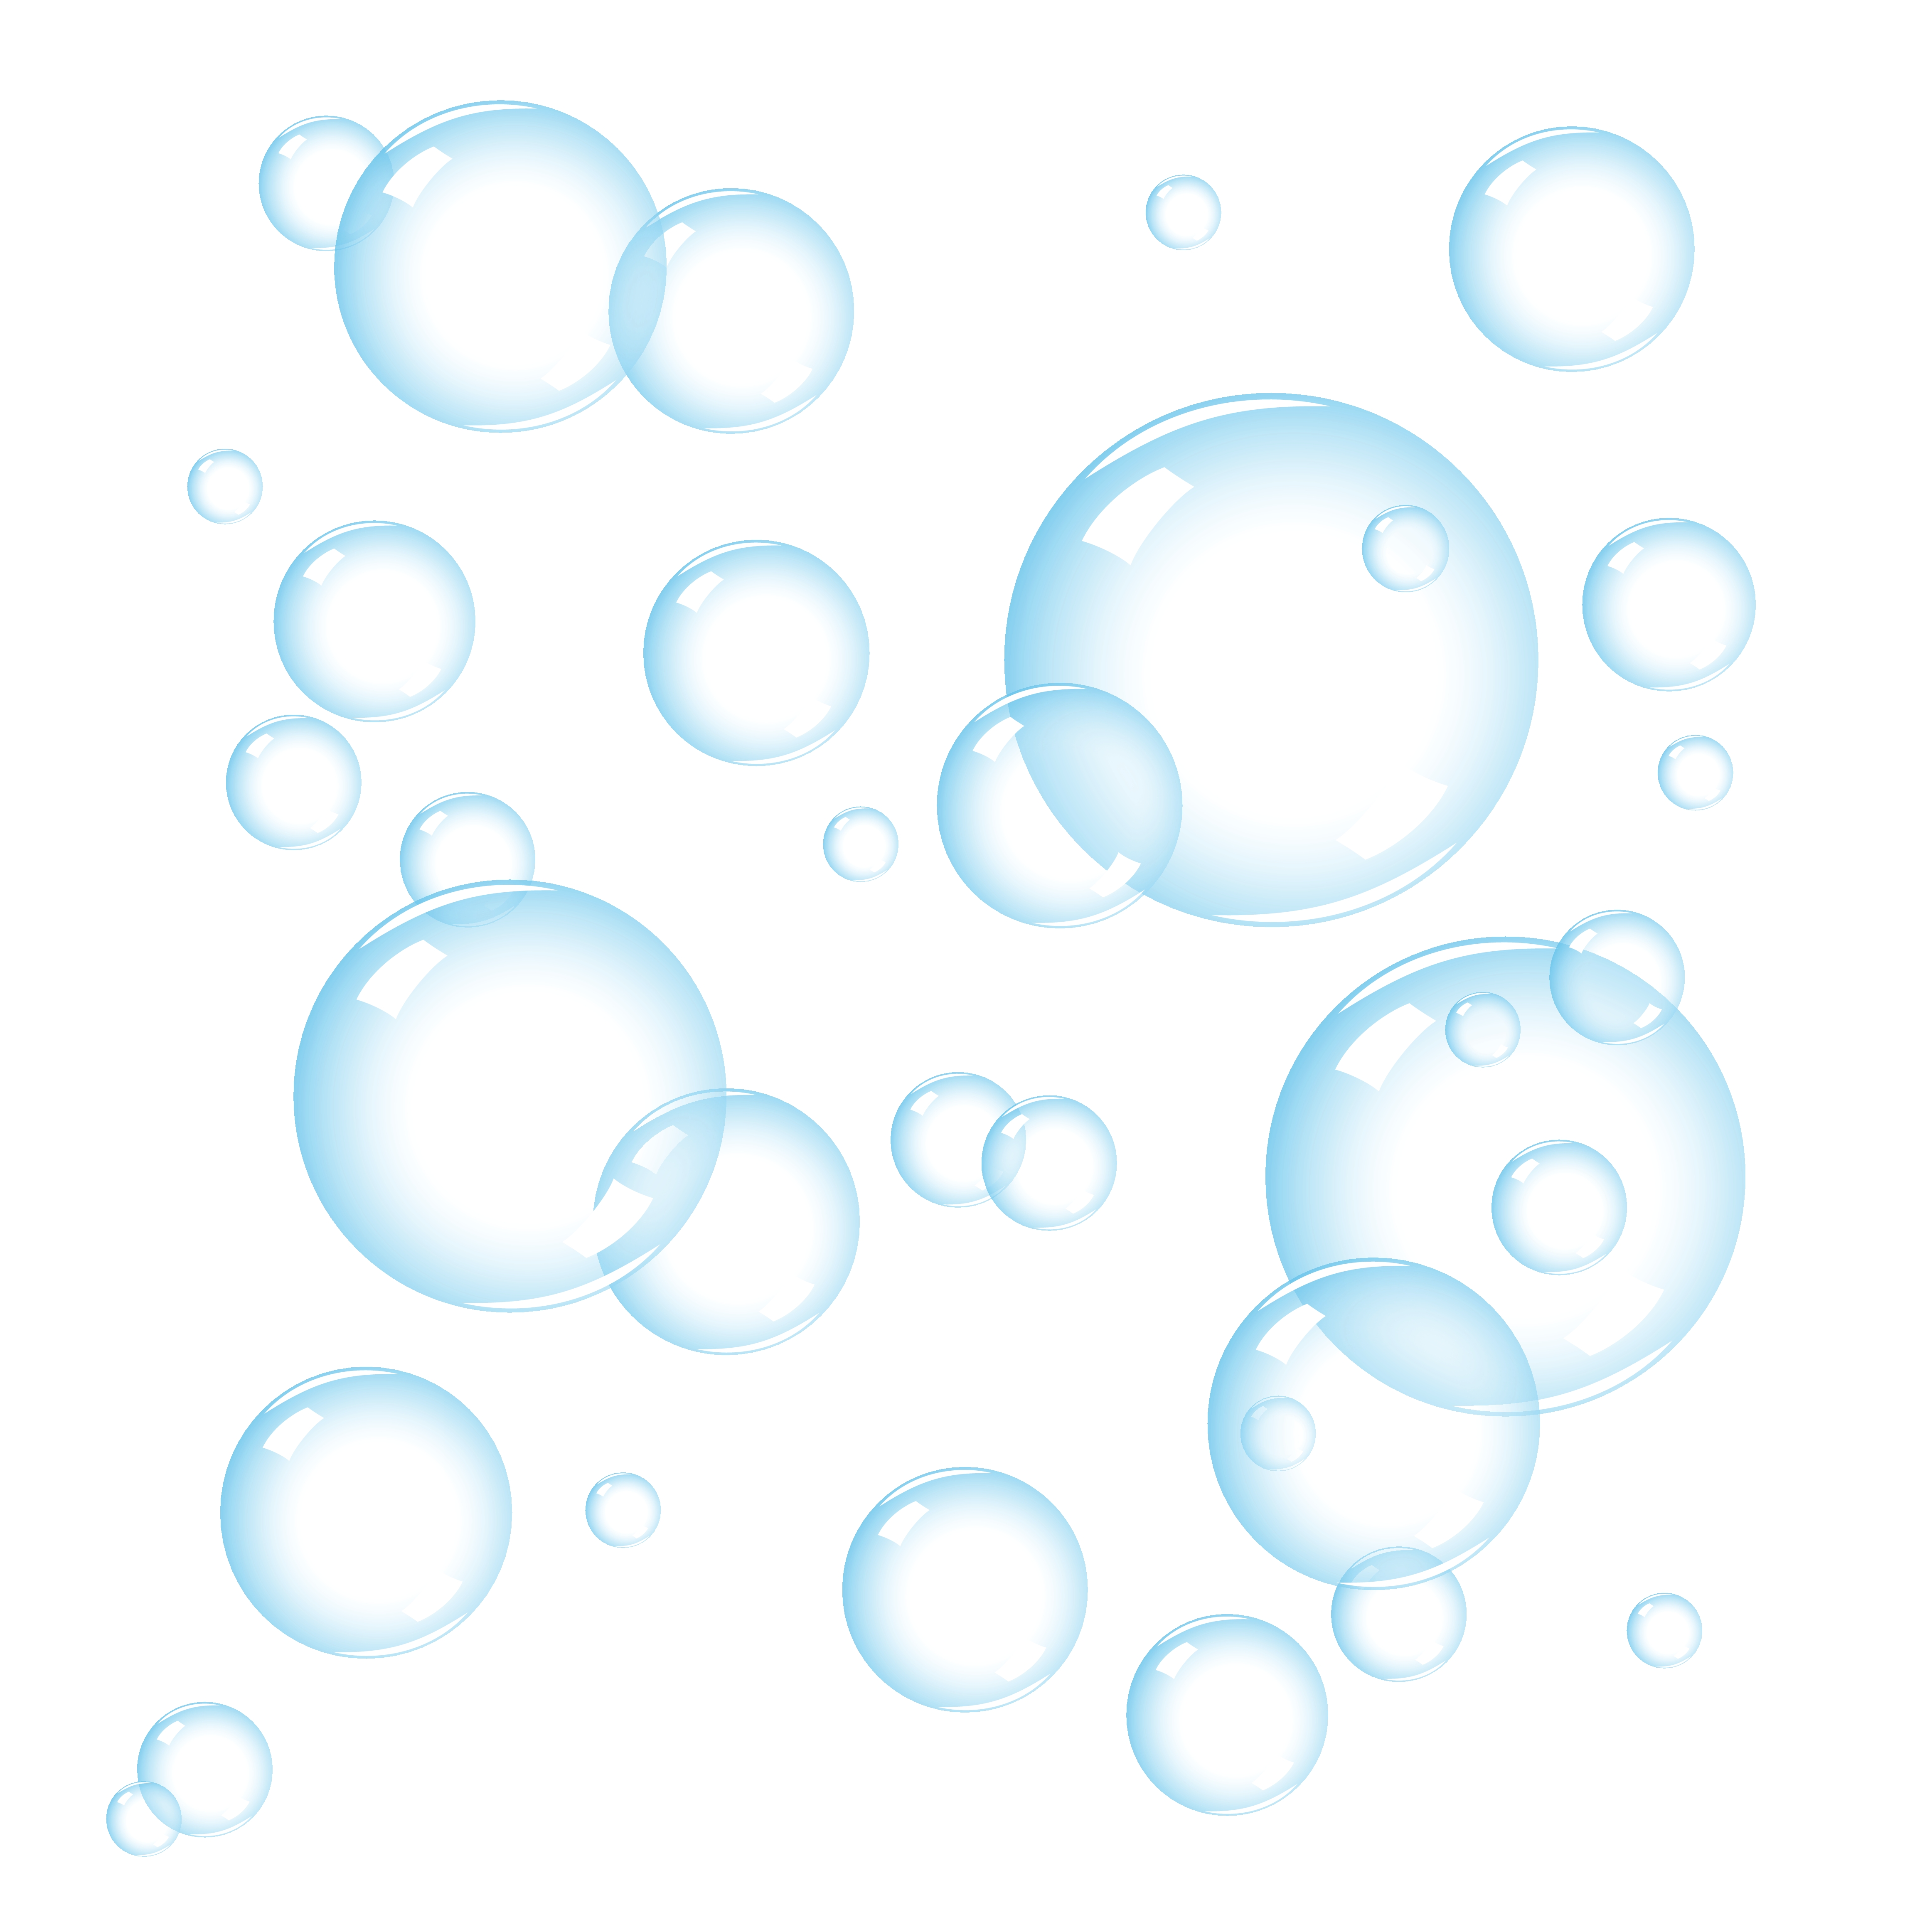 4649x4649 > Bubbles Wallpapers